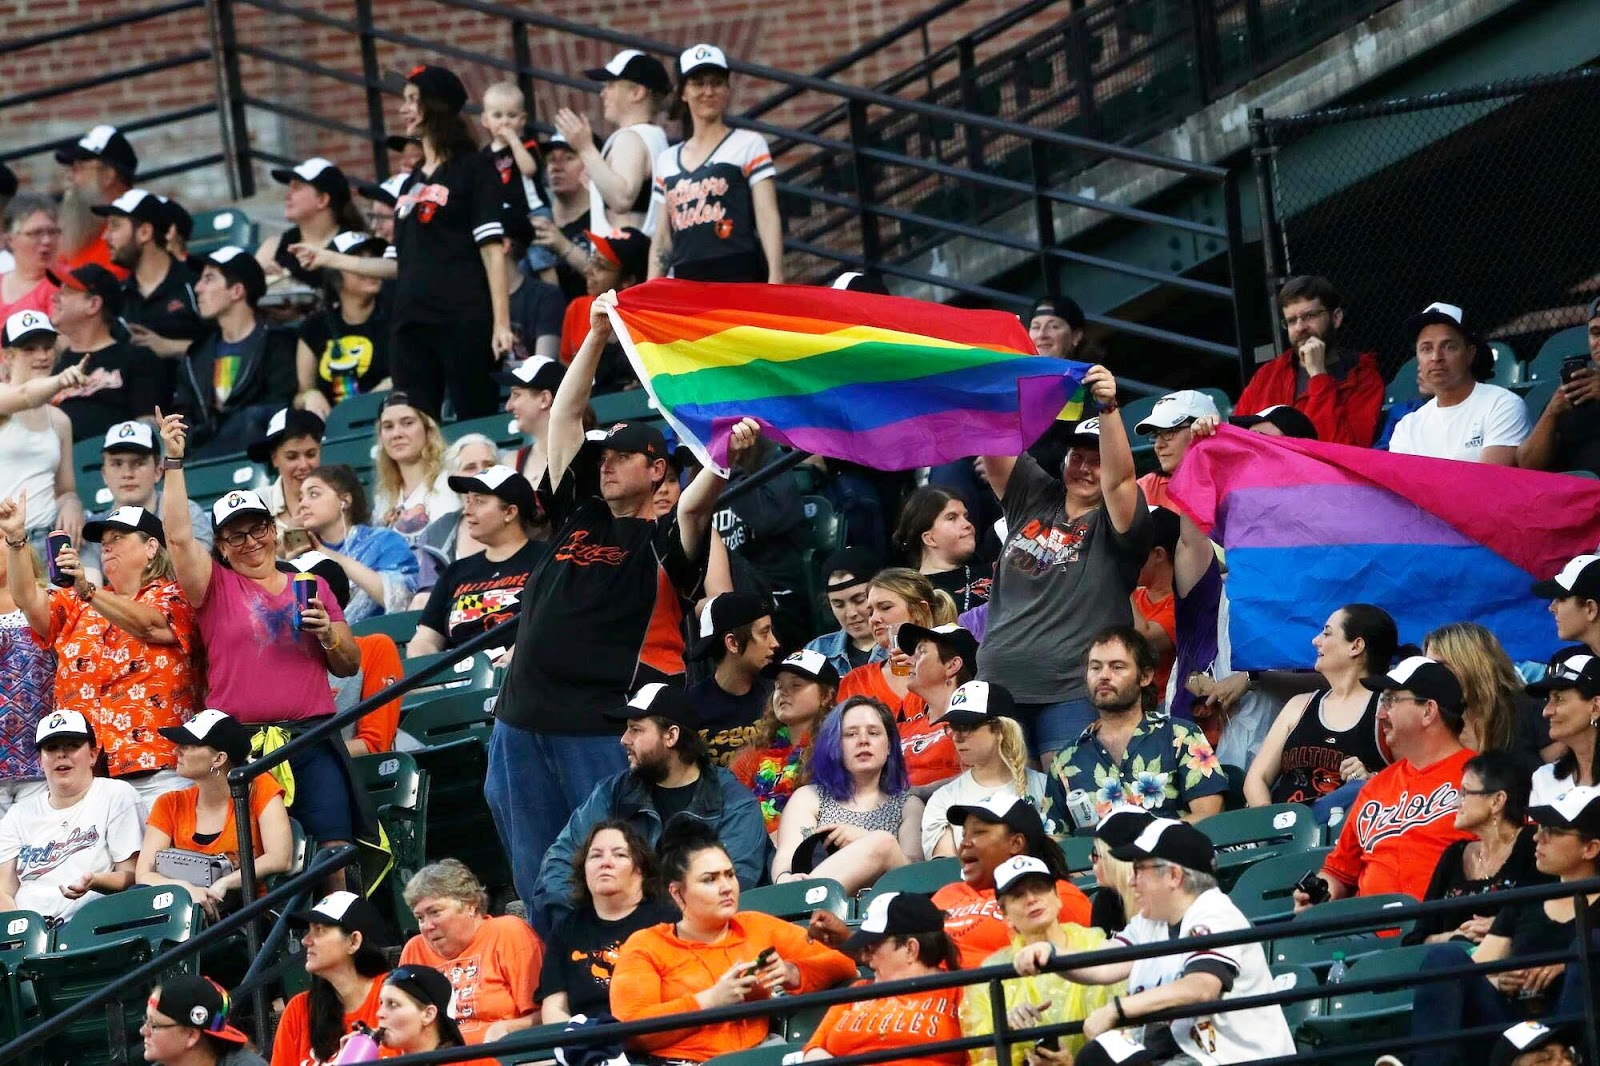 Steve Charing OUTspoken Orioles Host Their First LGBT Pride Night